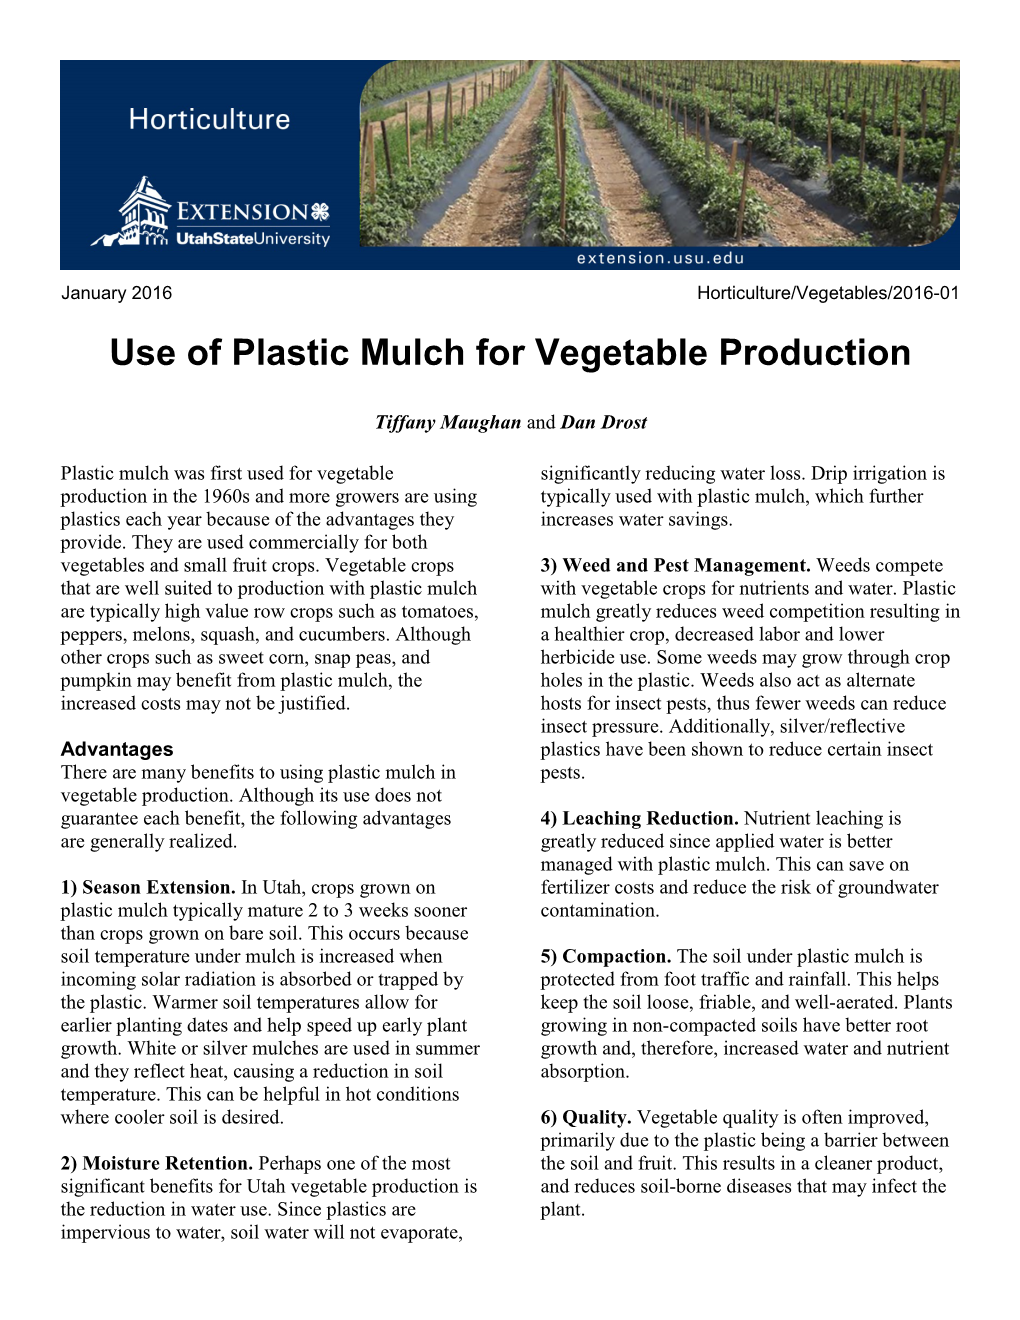 Use of Plastic Mulch for Vegetable Production